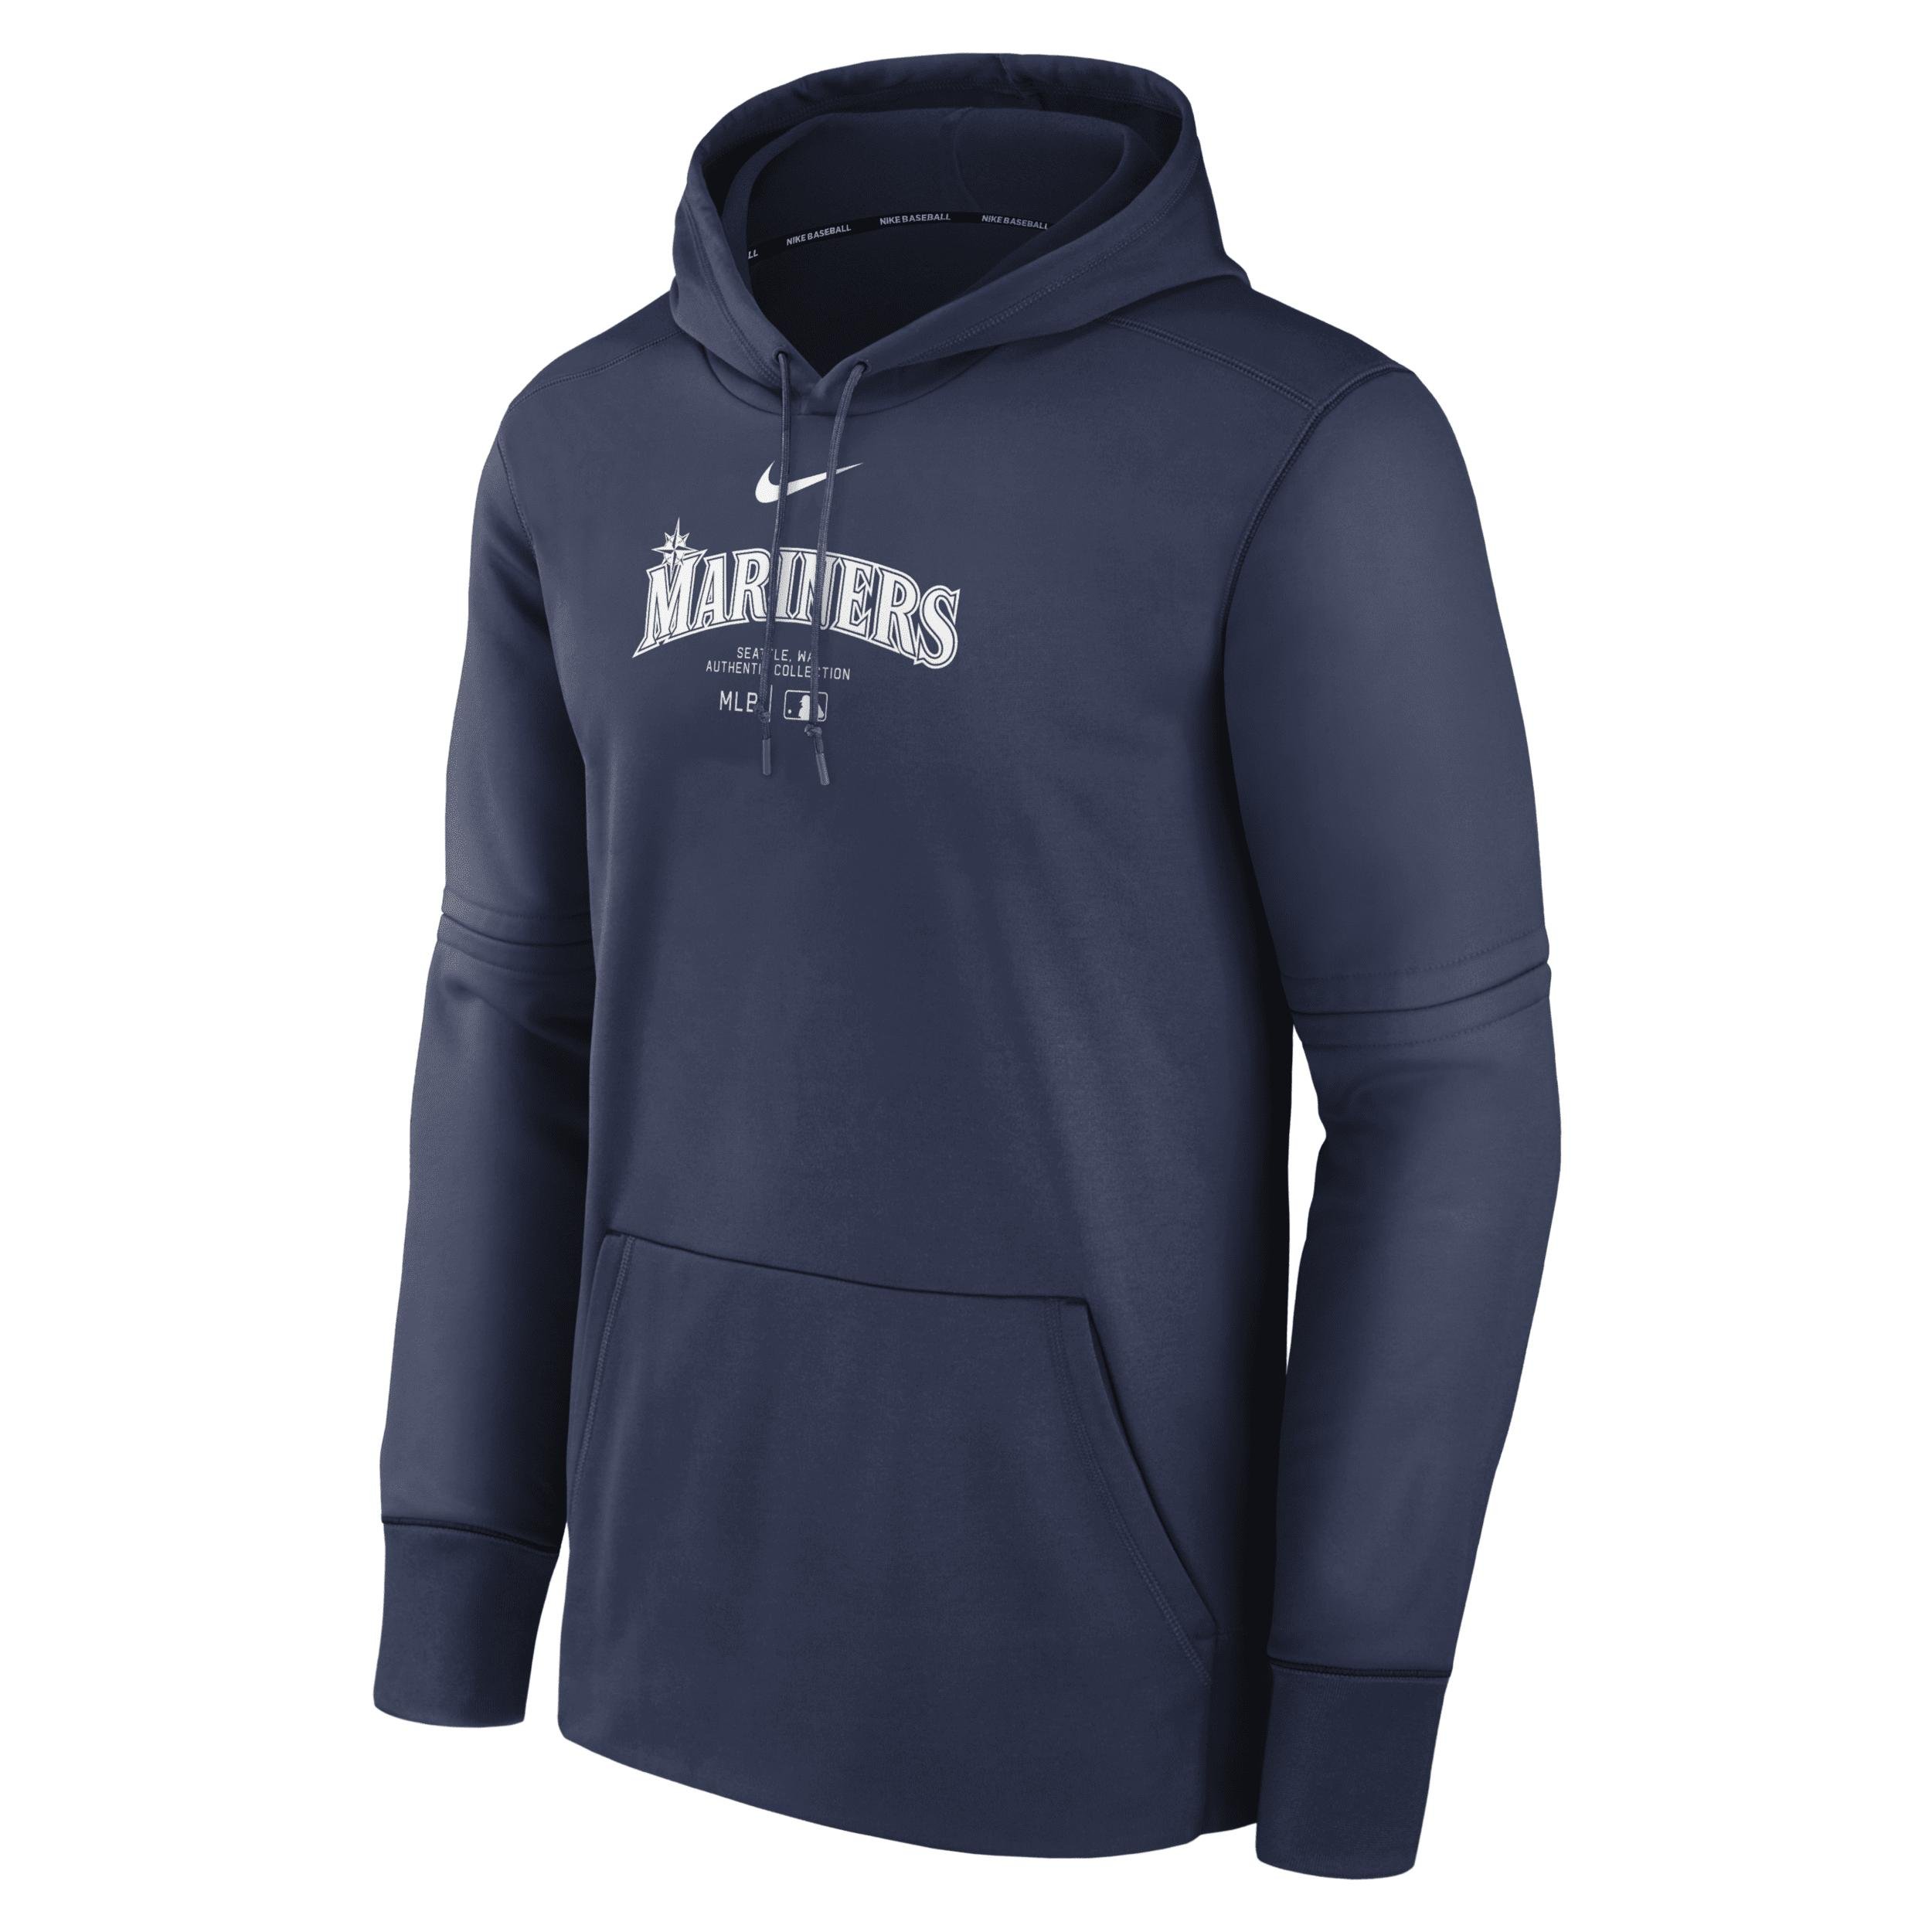 Men's Seattle Mariners Authentic Collection Practice Nike Therma MLB Pullover Hoodie by NIKE